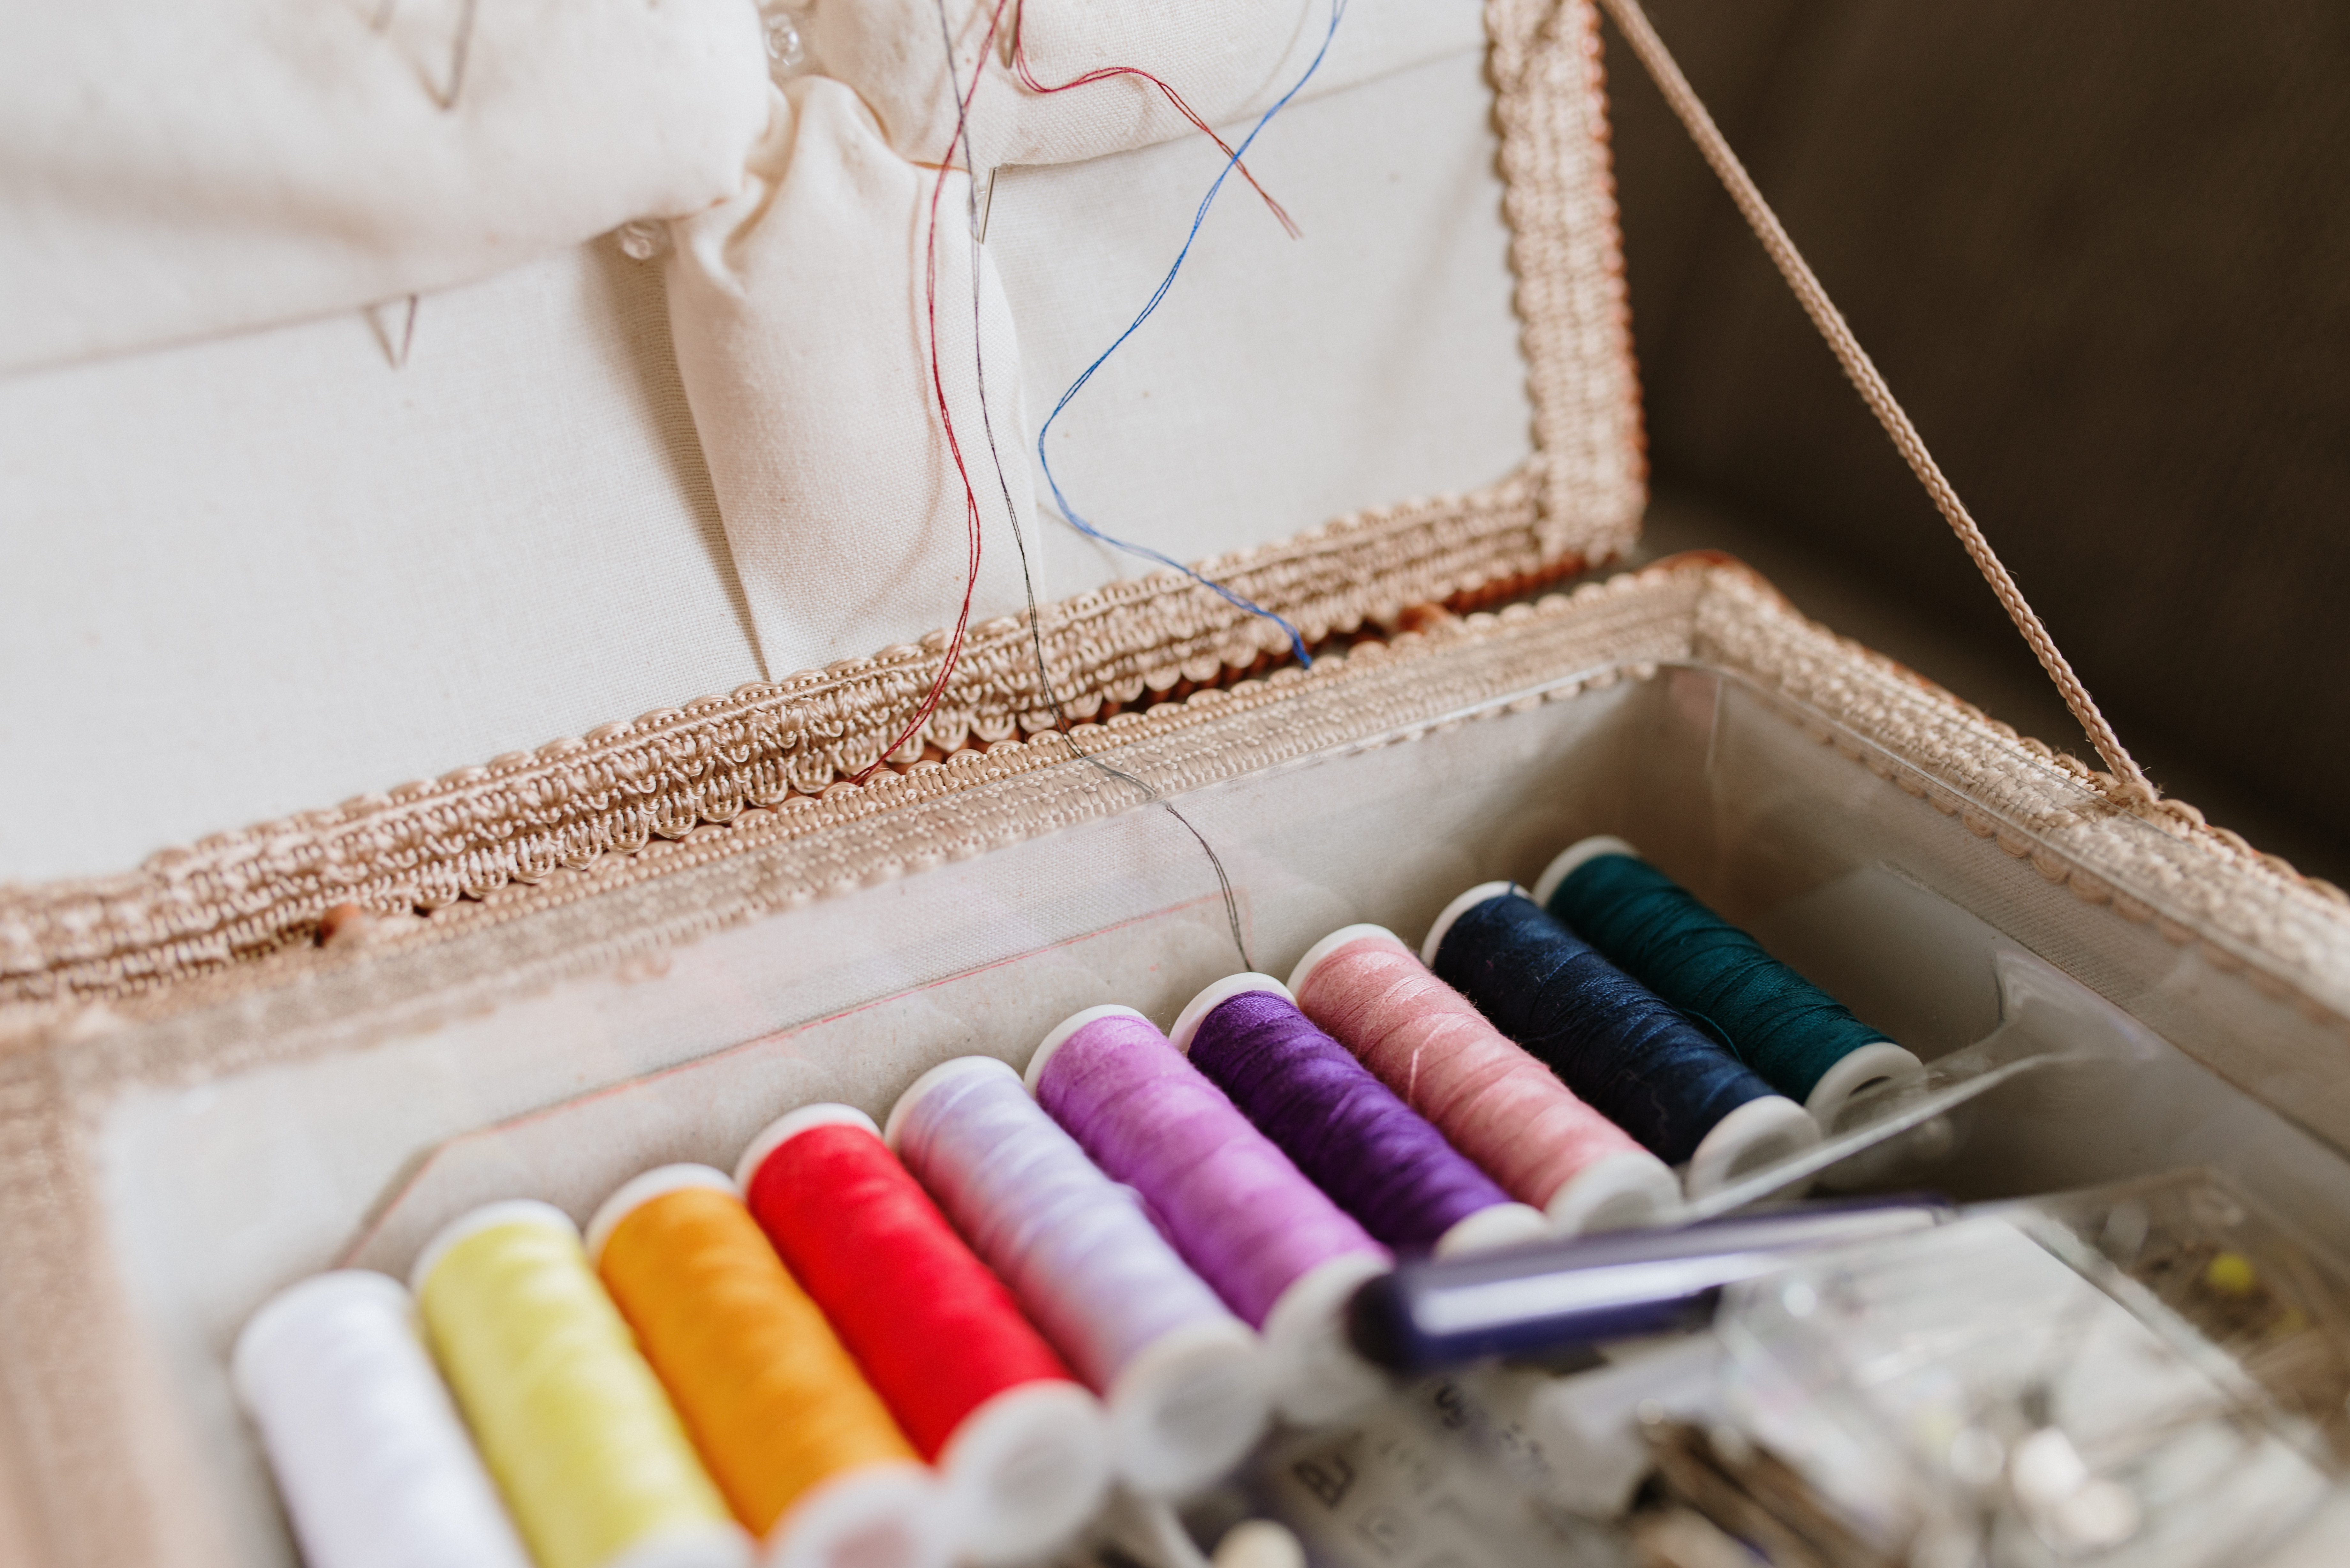 Best Needle Threaders: Stock Your Sewing Basket With These 6